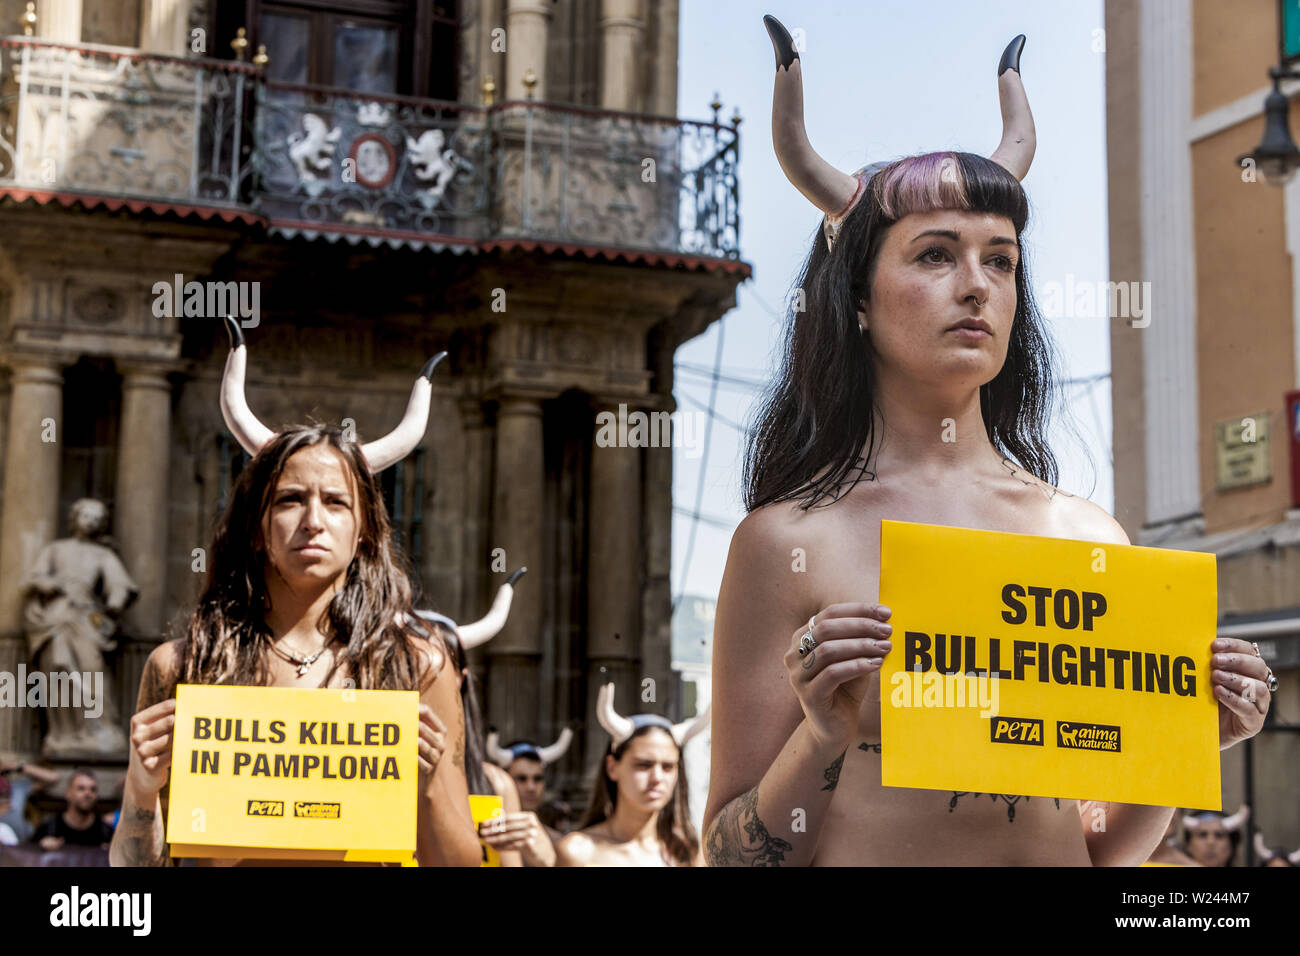 Pamplona, Navarra, Spain. 5th July, 2019. Activists against animal cruelty hold banners anti bullfightings killings during a protesting performance before the San Fermin celebrations in the main square of Pamplona, Spain. Credit: Celestino Arce Lavin/ZUMA Wire/Alamy Live News Stock Photo